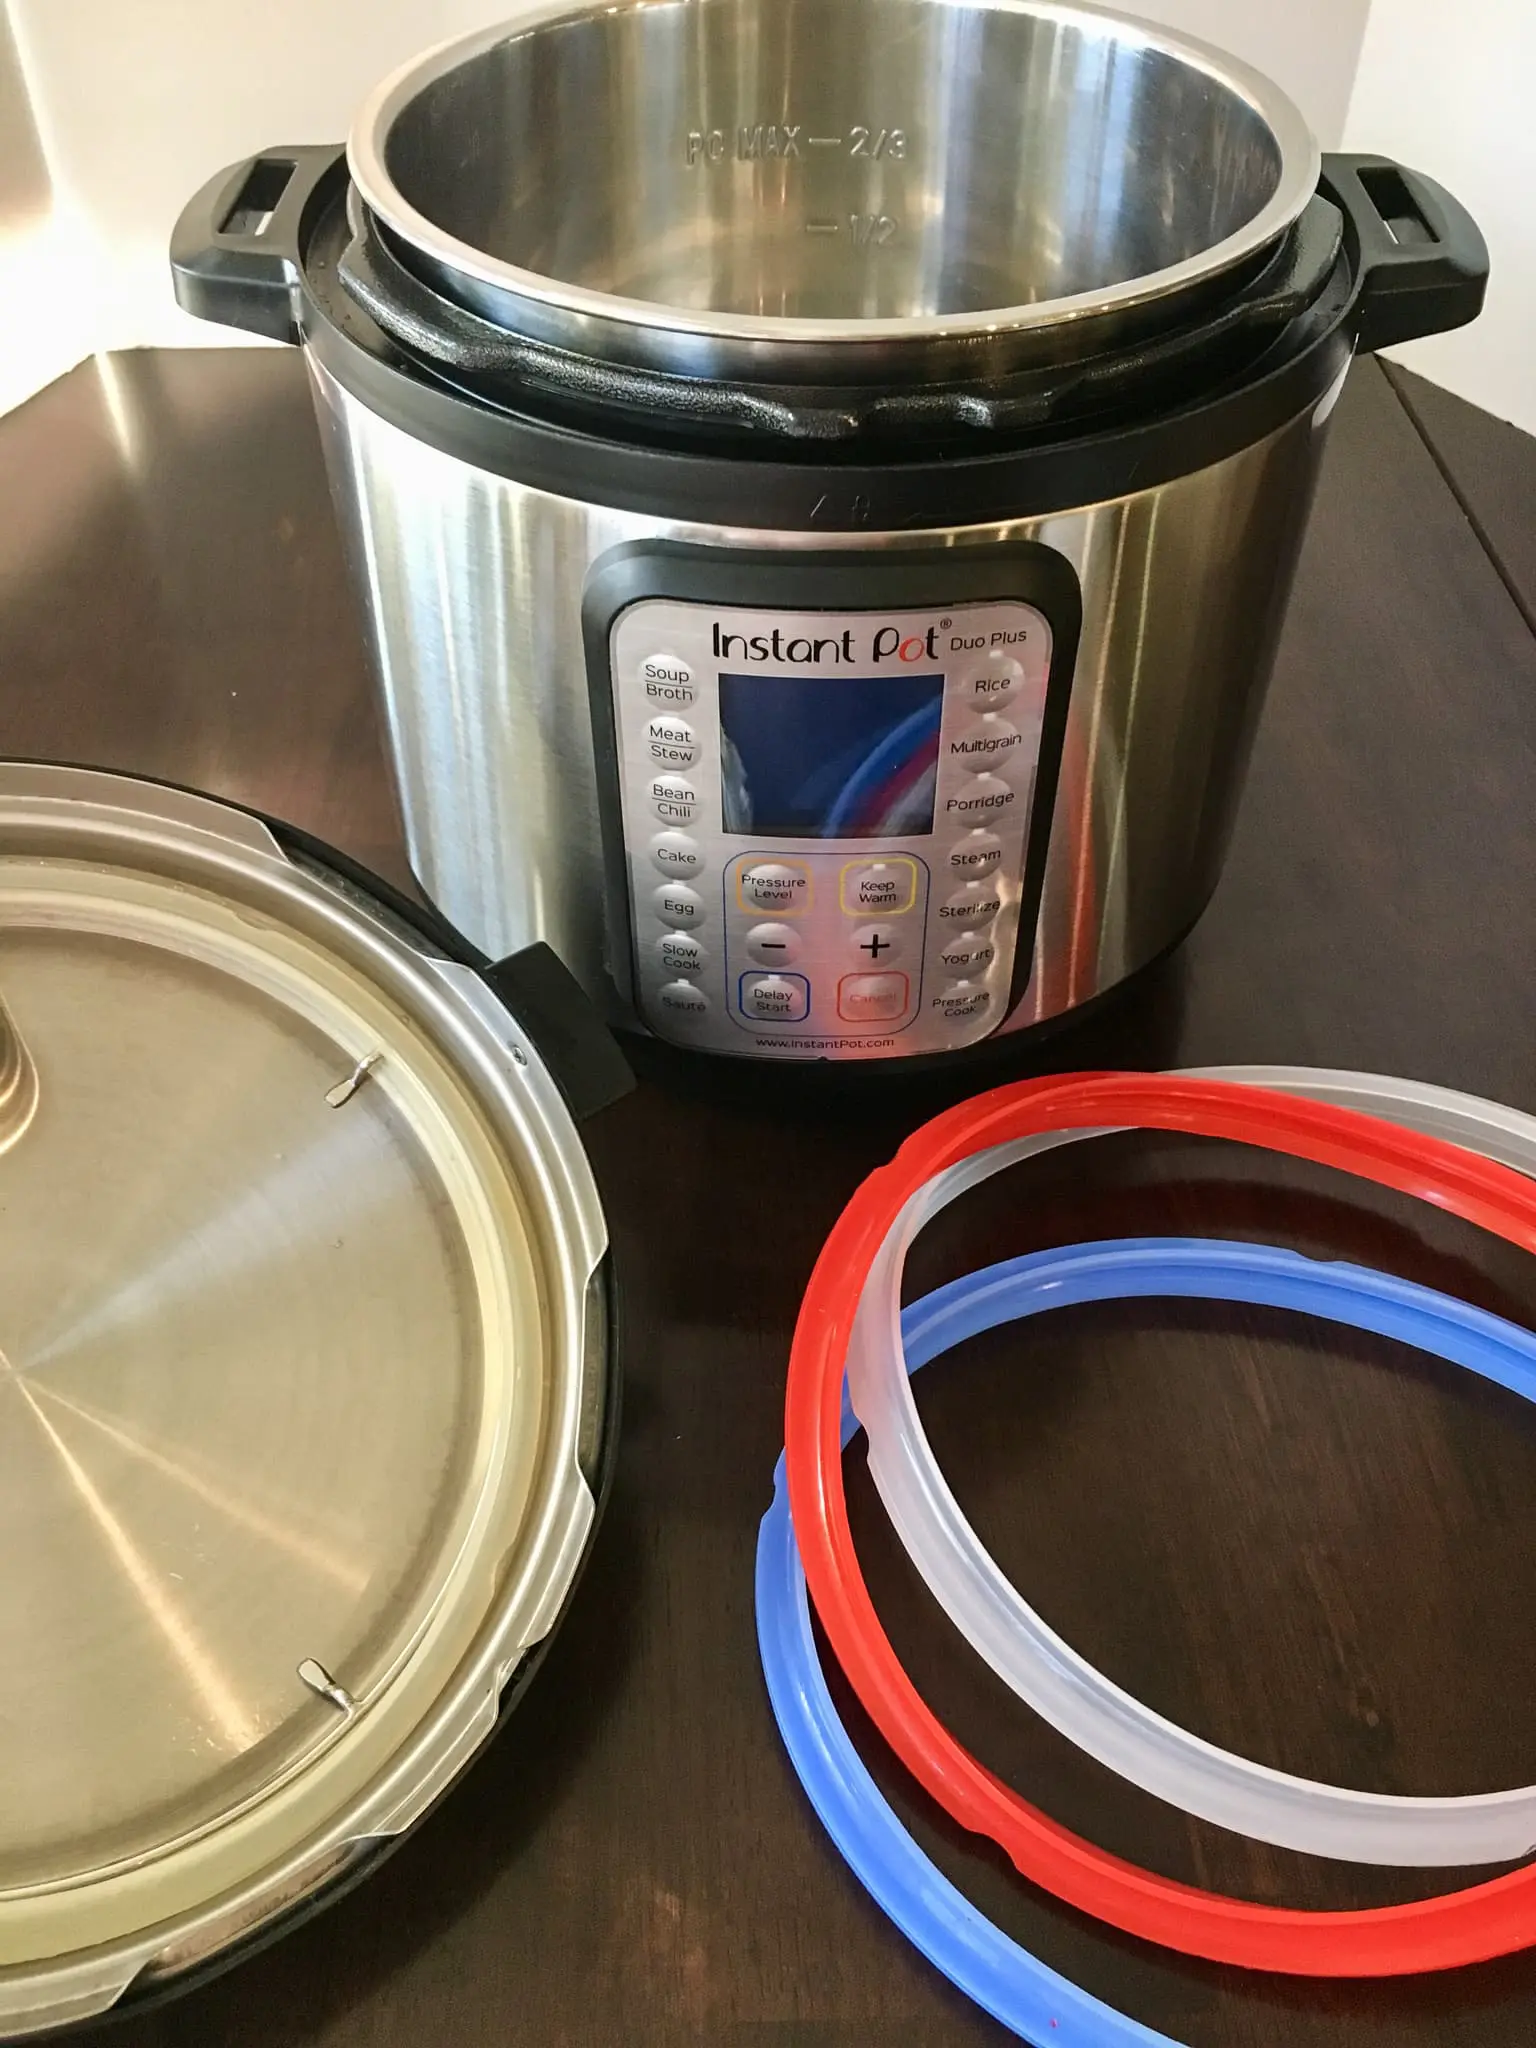 this photo illustrates the supplies used for basics of pressure cooking